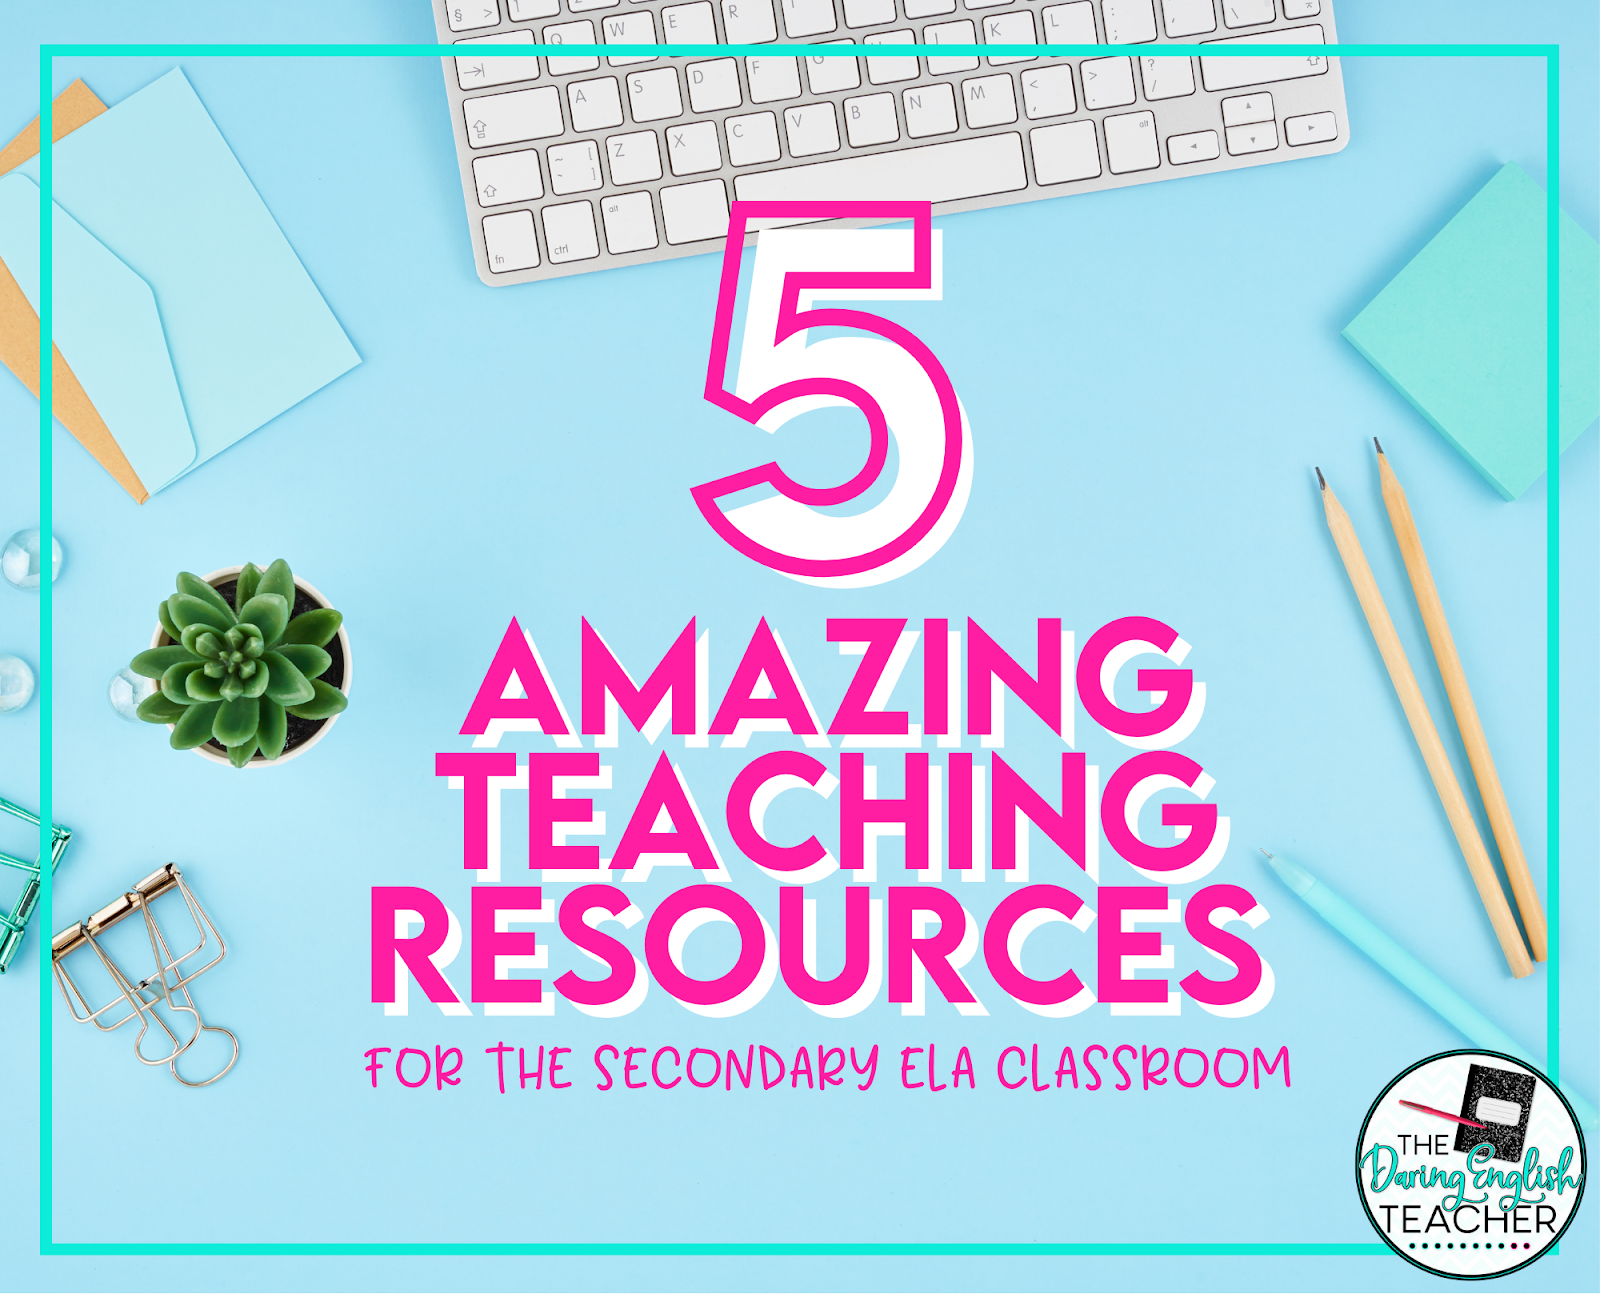 Five Amazing Teaching Resources for Your Secondary ELA Classroom